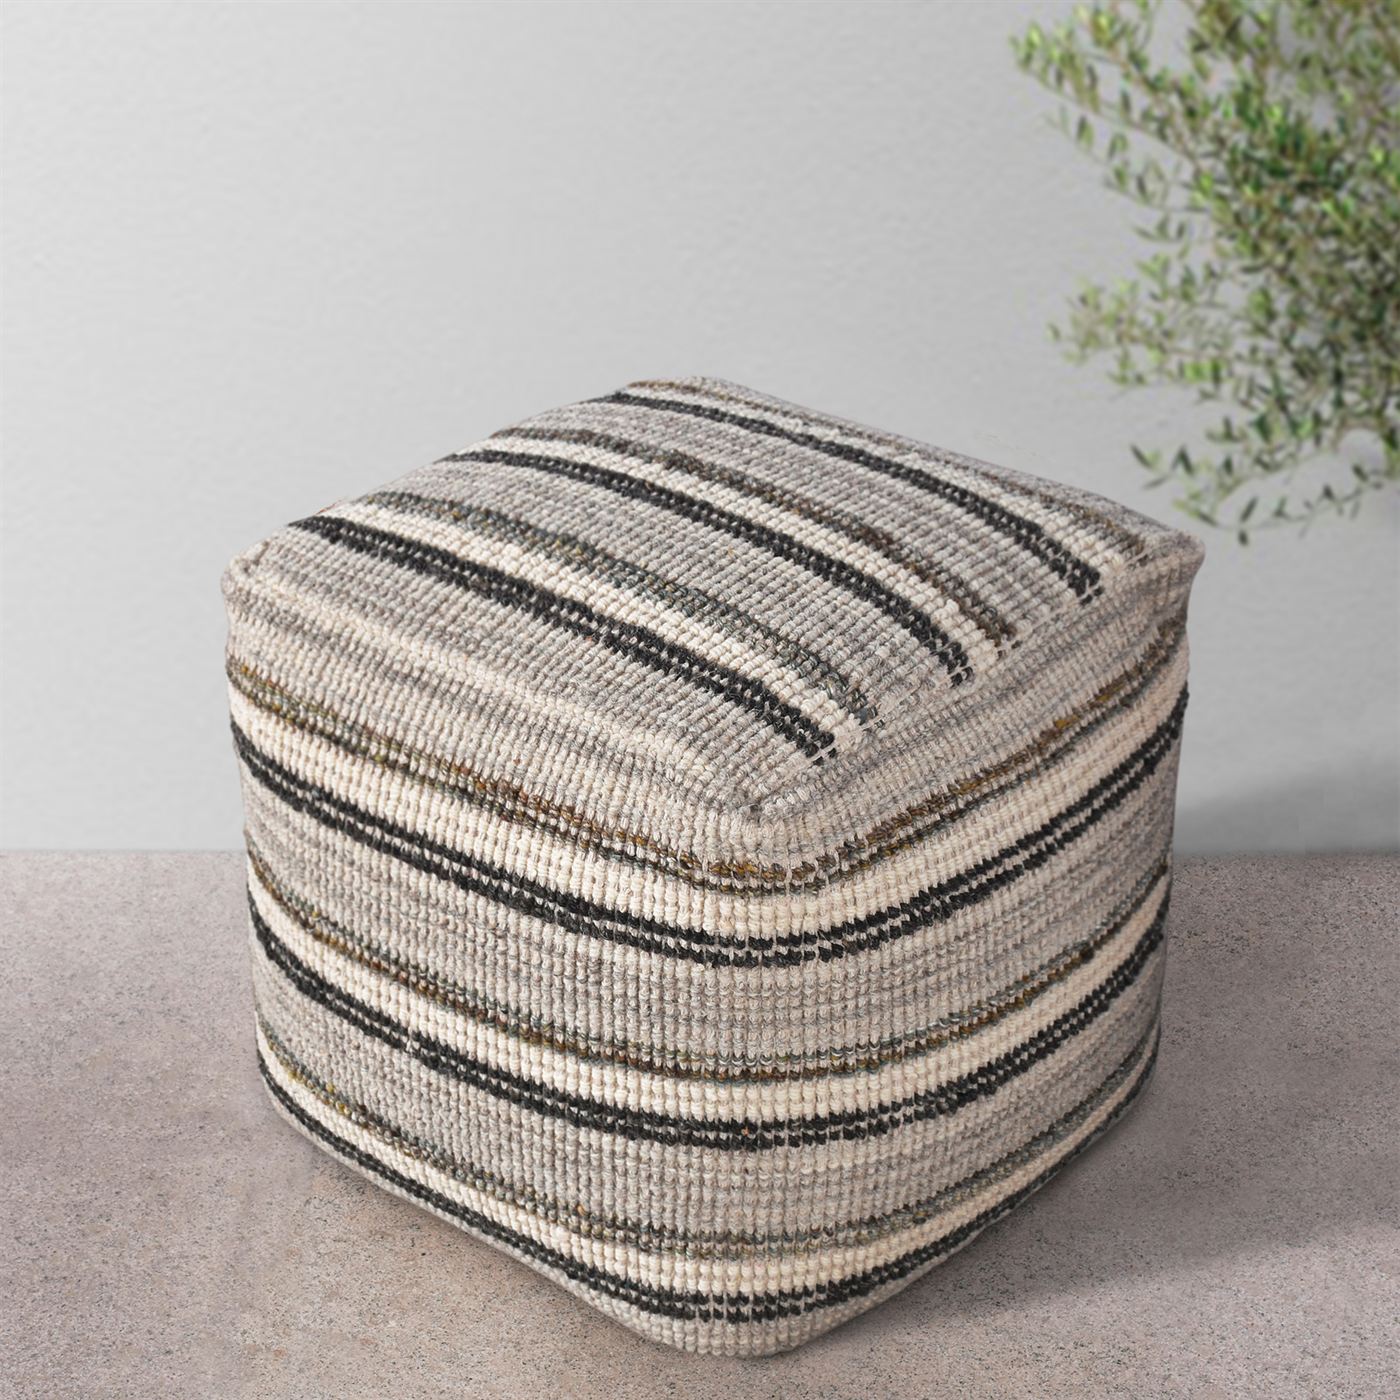 Tarbes Pouf, Wool/ Viscose, Natural White/ Grey/ Charcoal, Hand woven, Flat Weave 